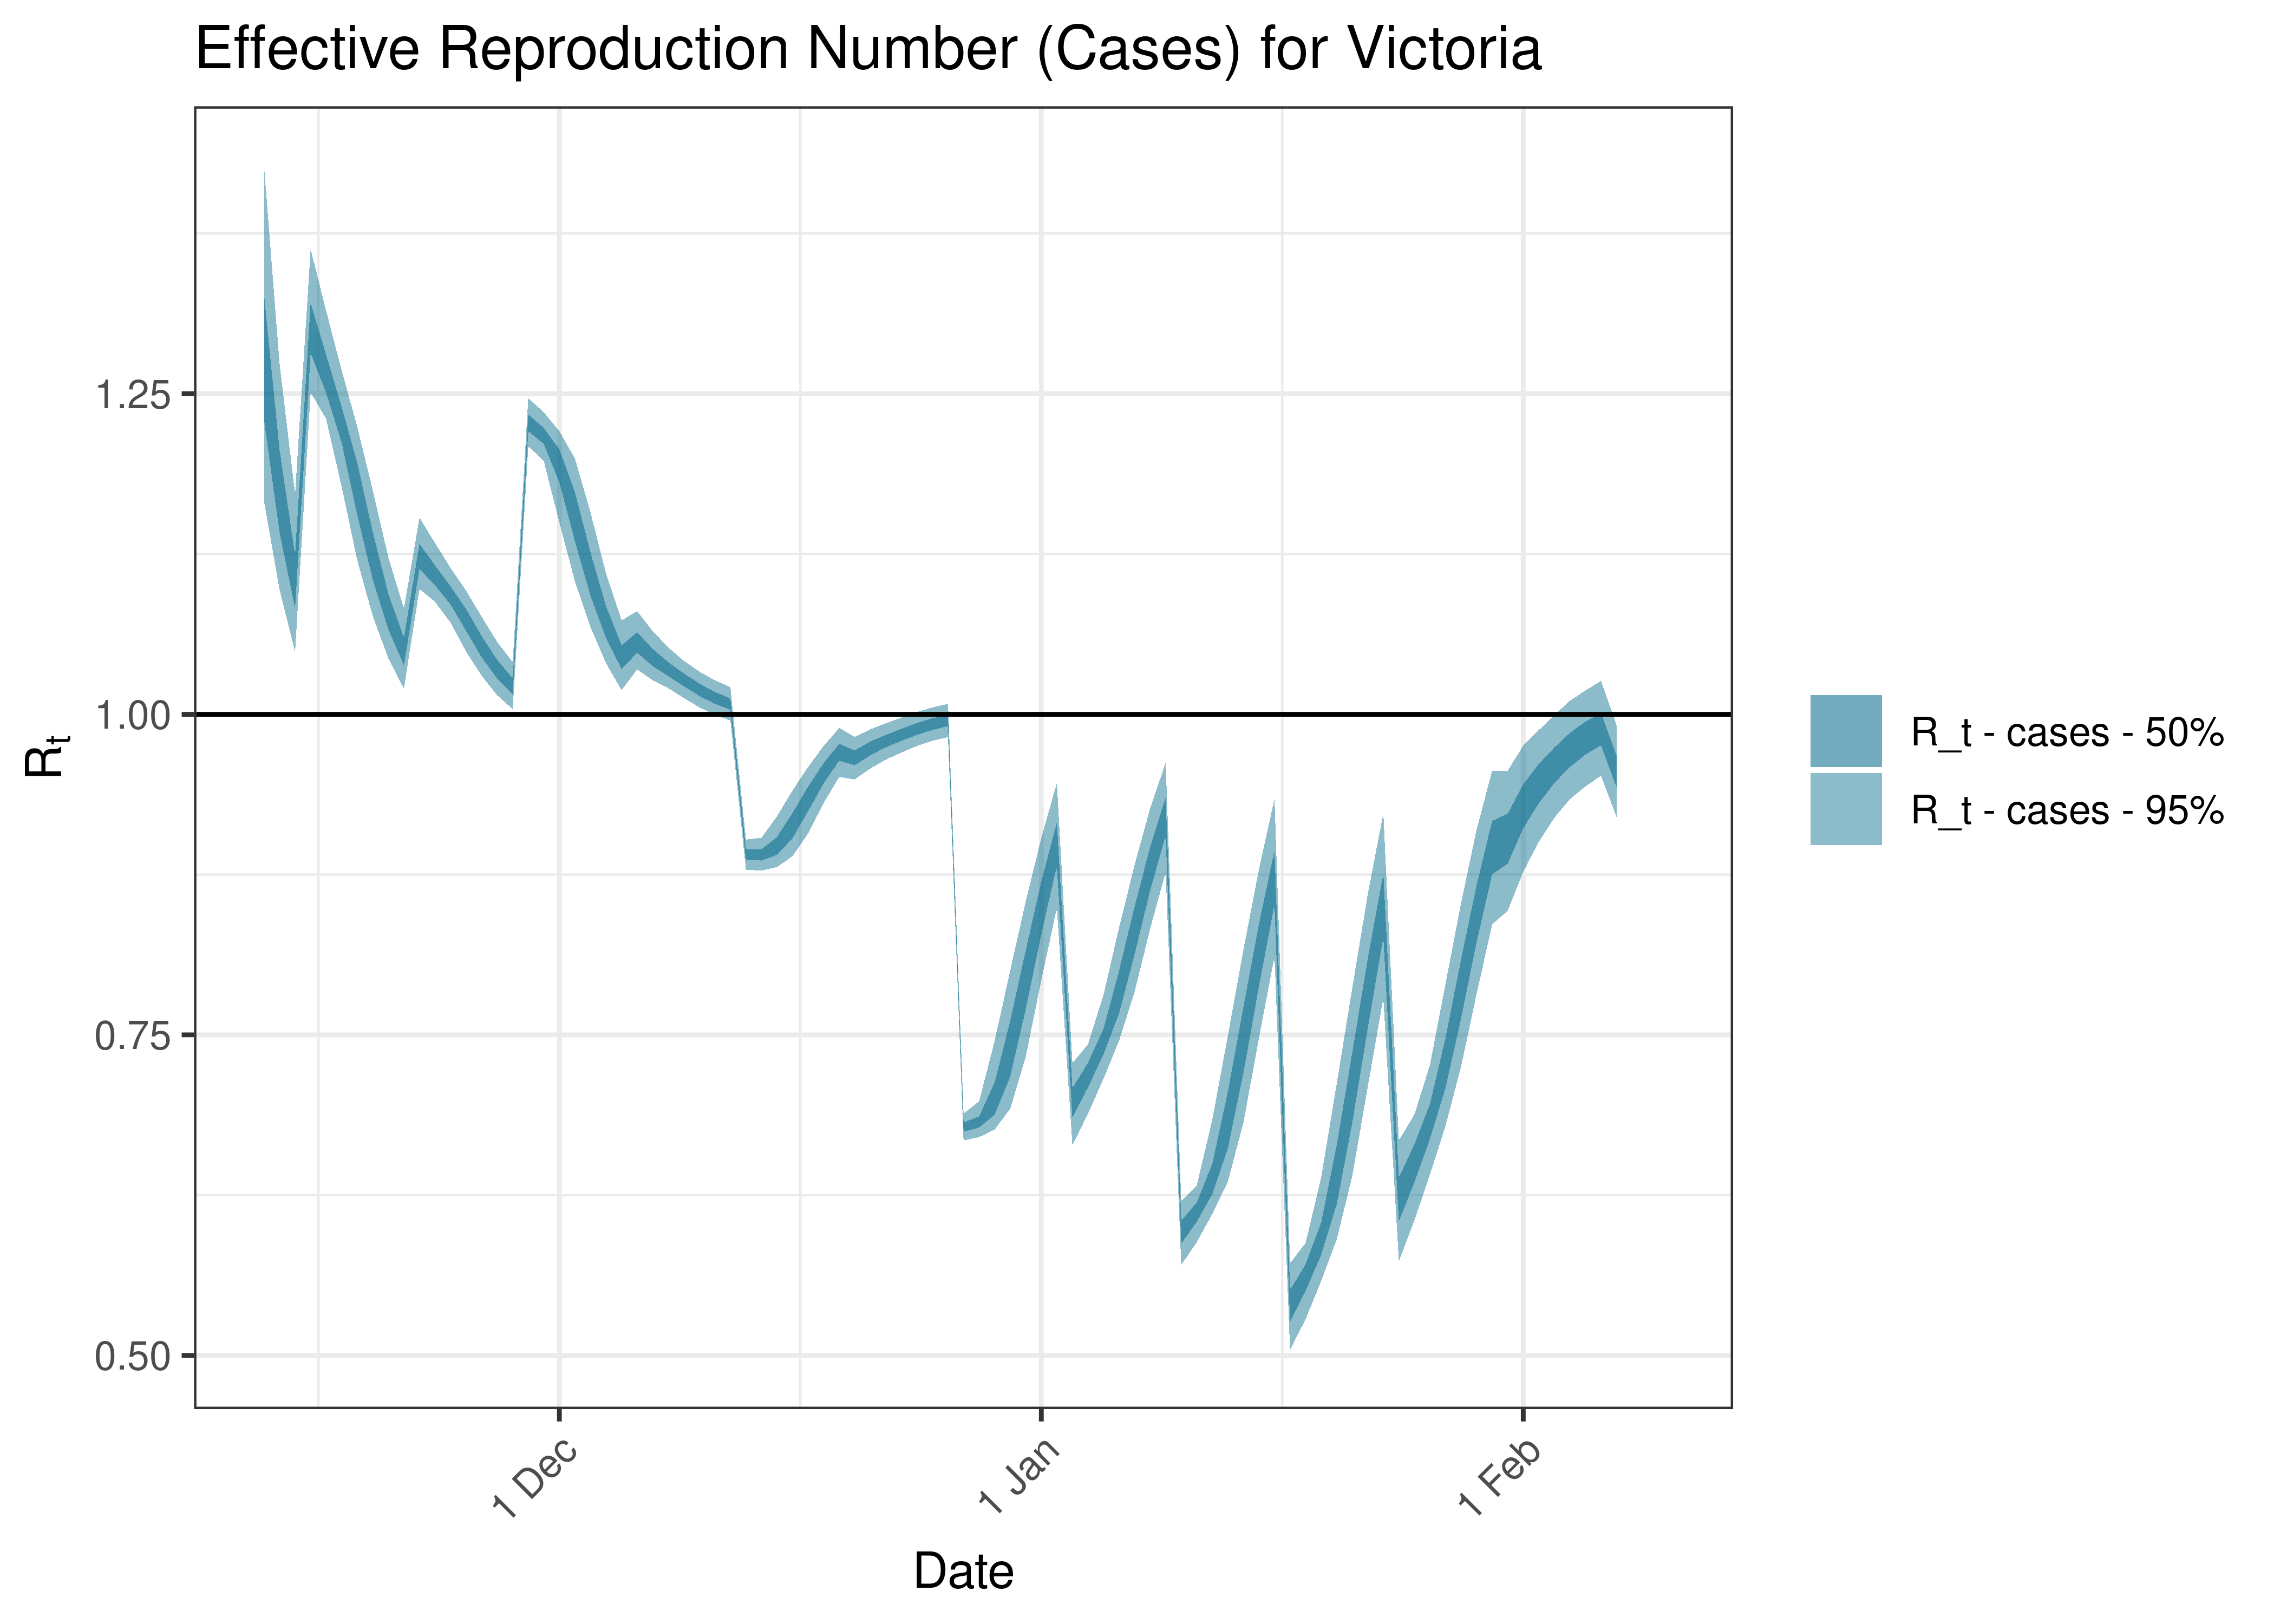 Victoria - Daily Hospital Counts for Last 30-days (7-day moving average)